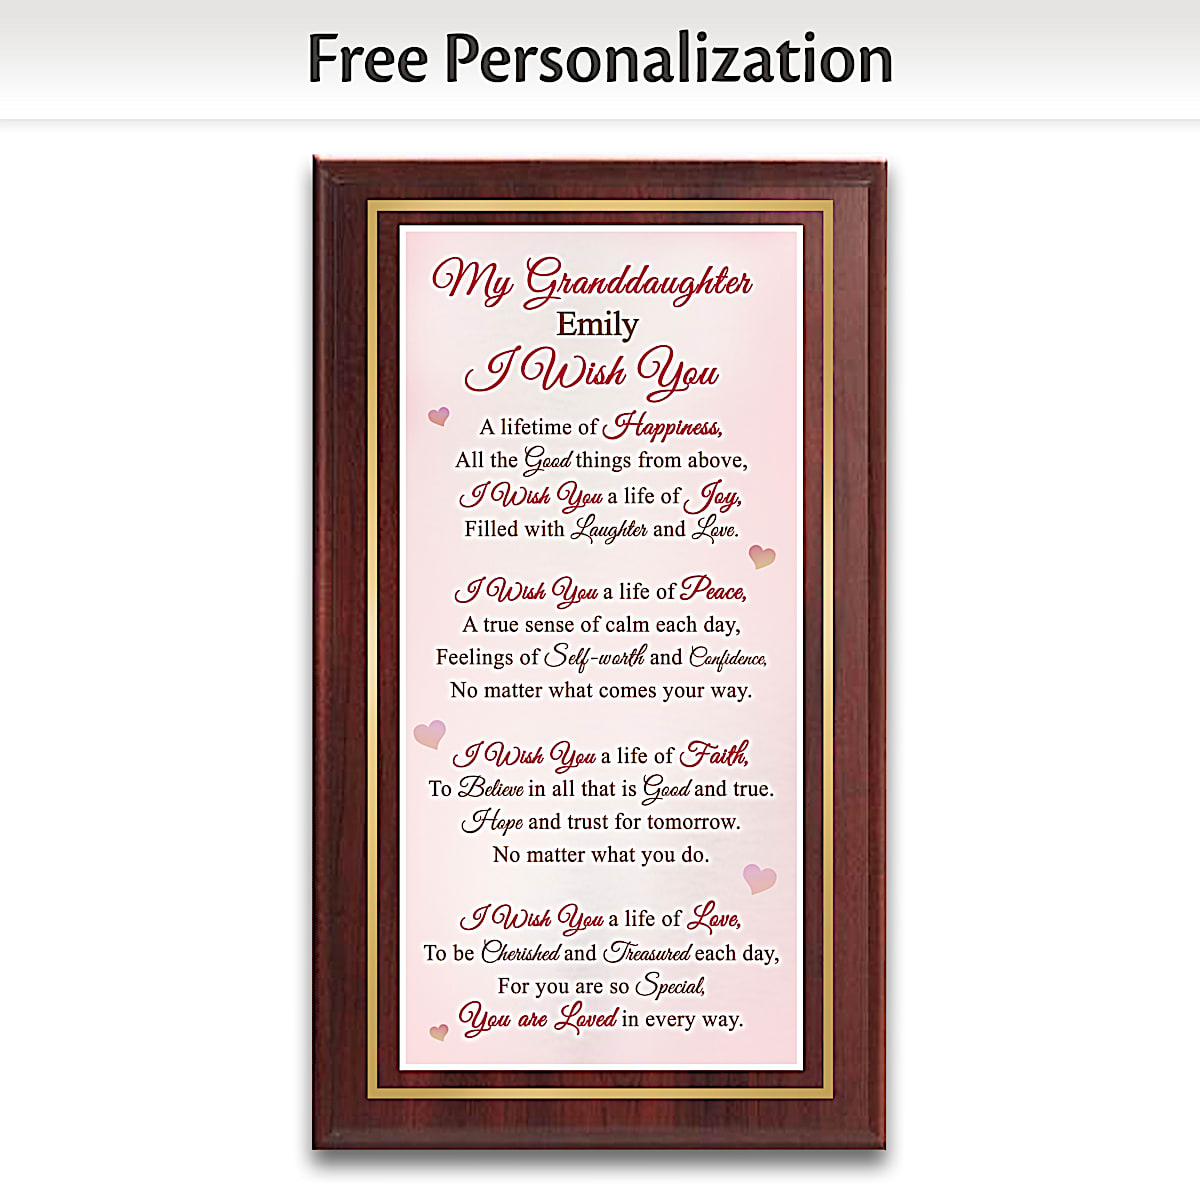 Lampees Varna Crafts Personalized Engraved Wooden Photo Plaque Gift for  Birthday (8 X 6 Inches, Brown) (Laser Engraved) (UV-01) : Amazon.in: Home &  Kitchen